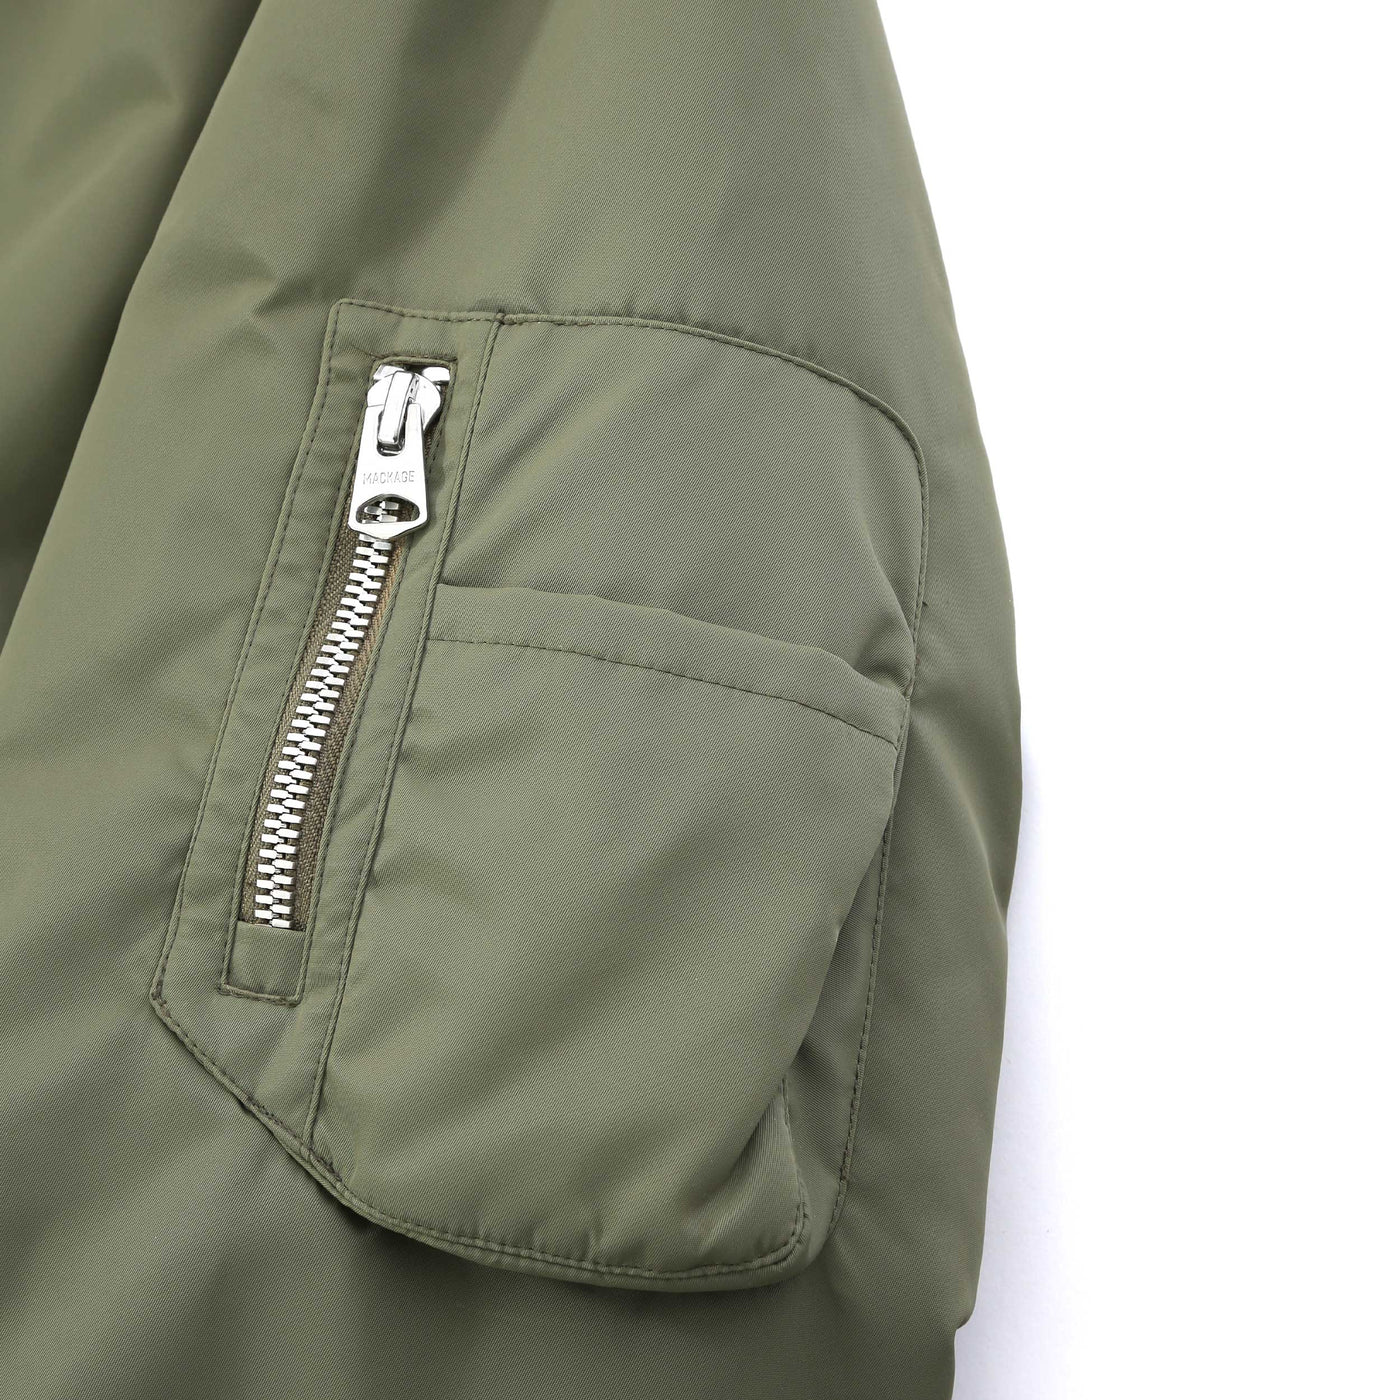 Mackage S Francis Jacket in Military Pocket